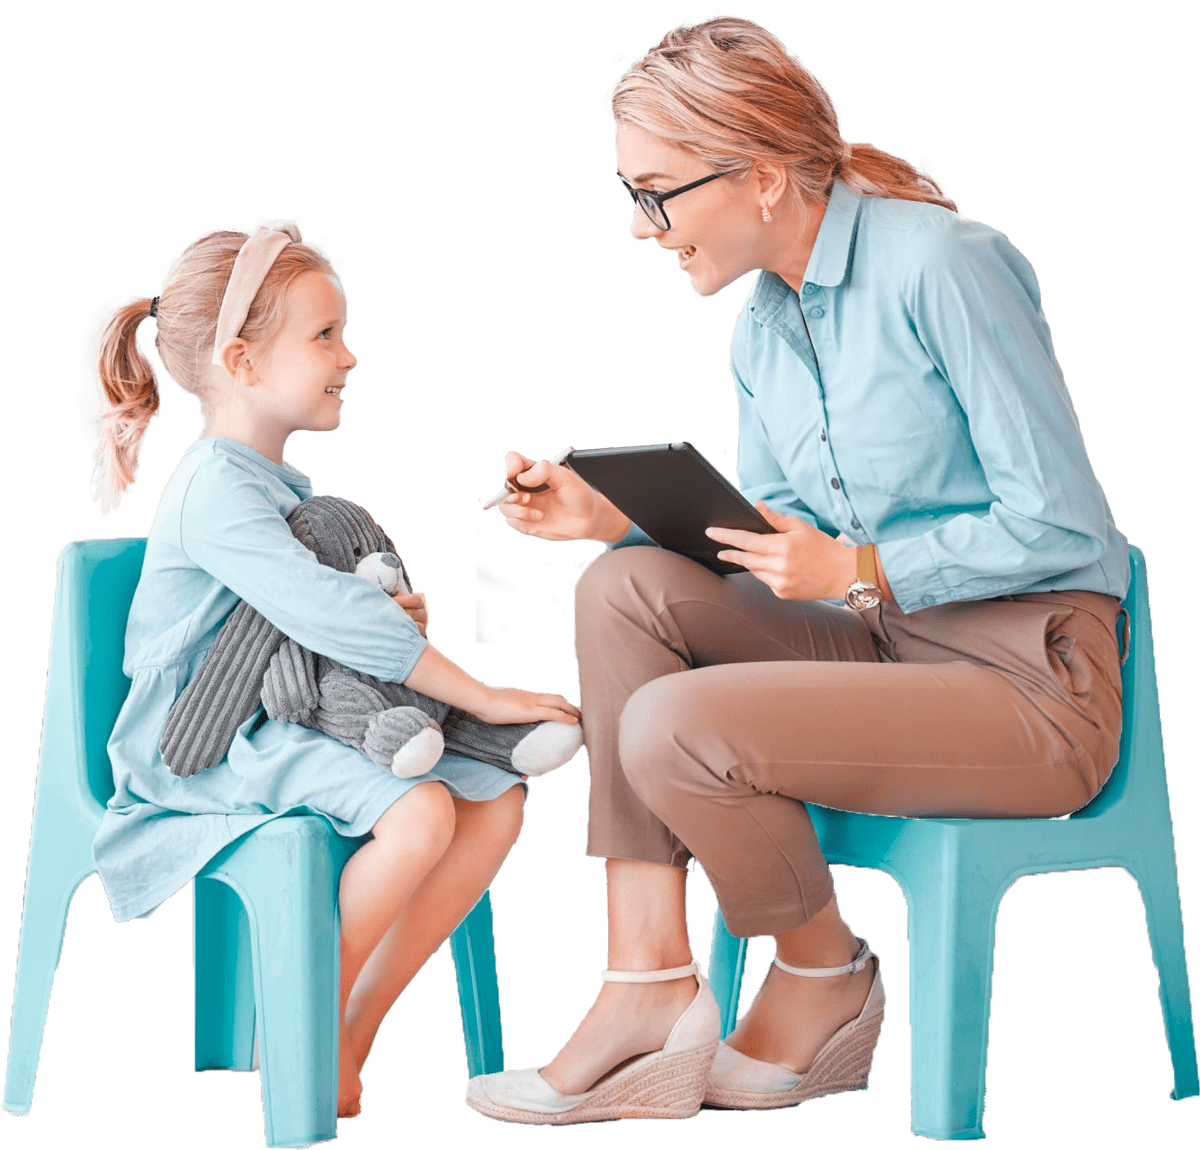 Clinician holding an ipad, sitting with young female caucasian client